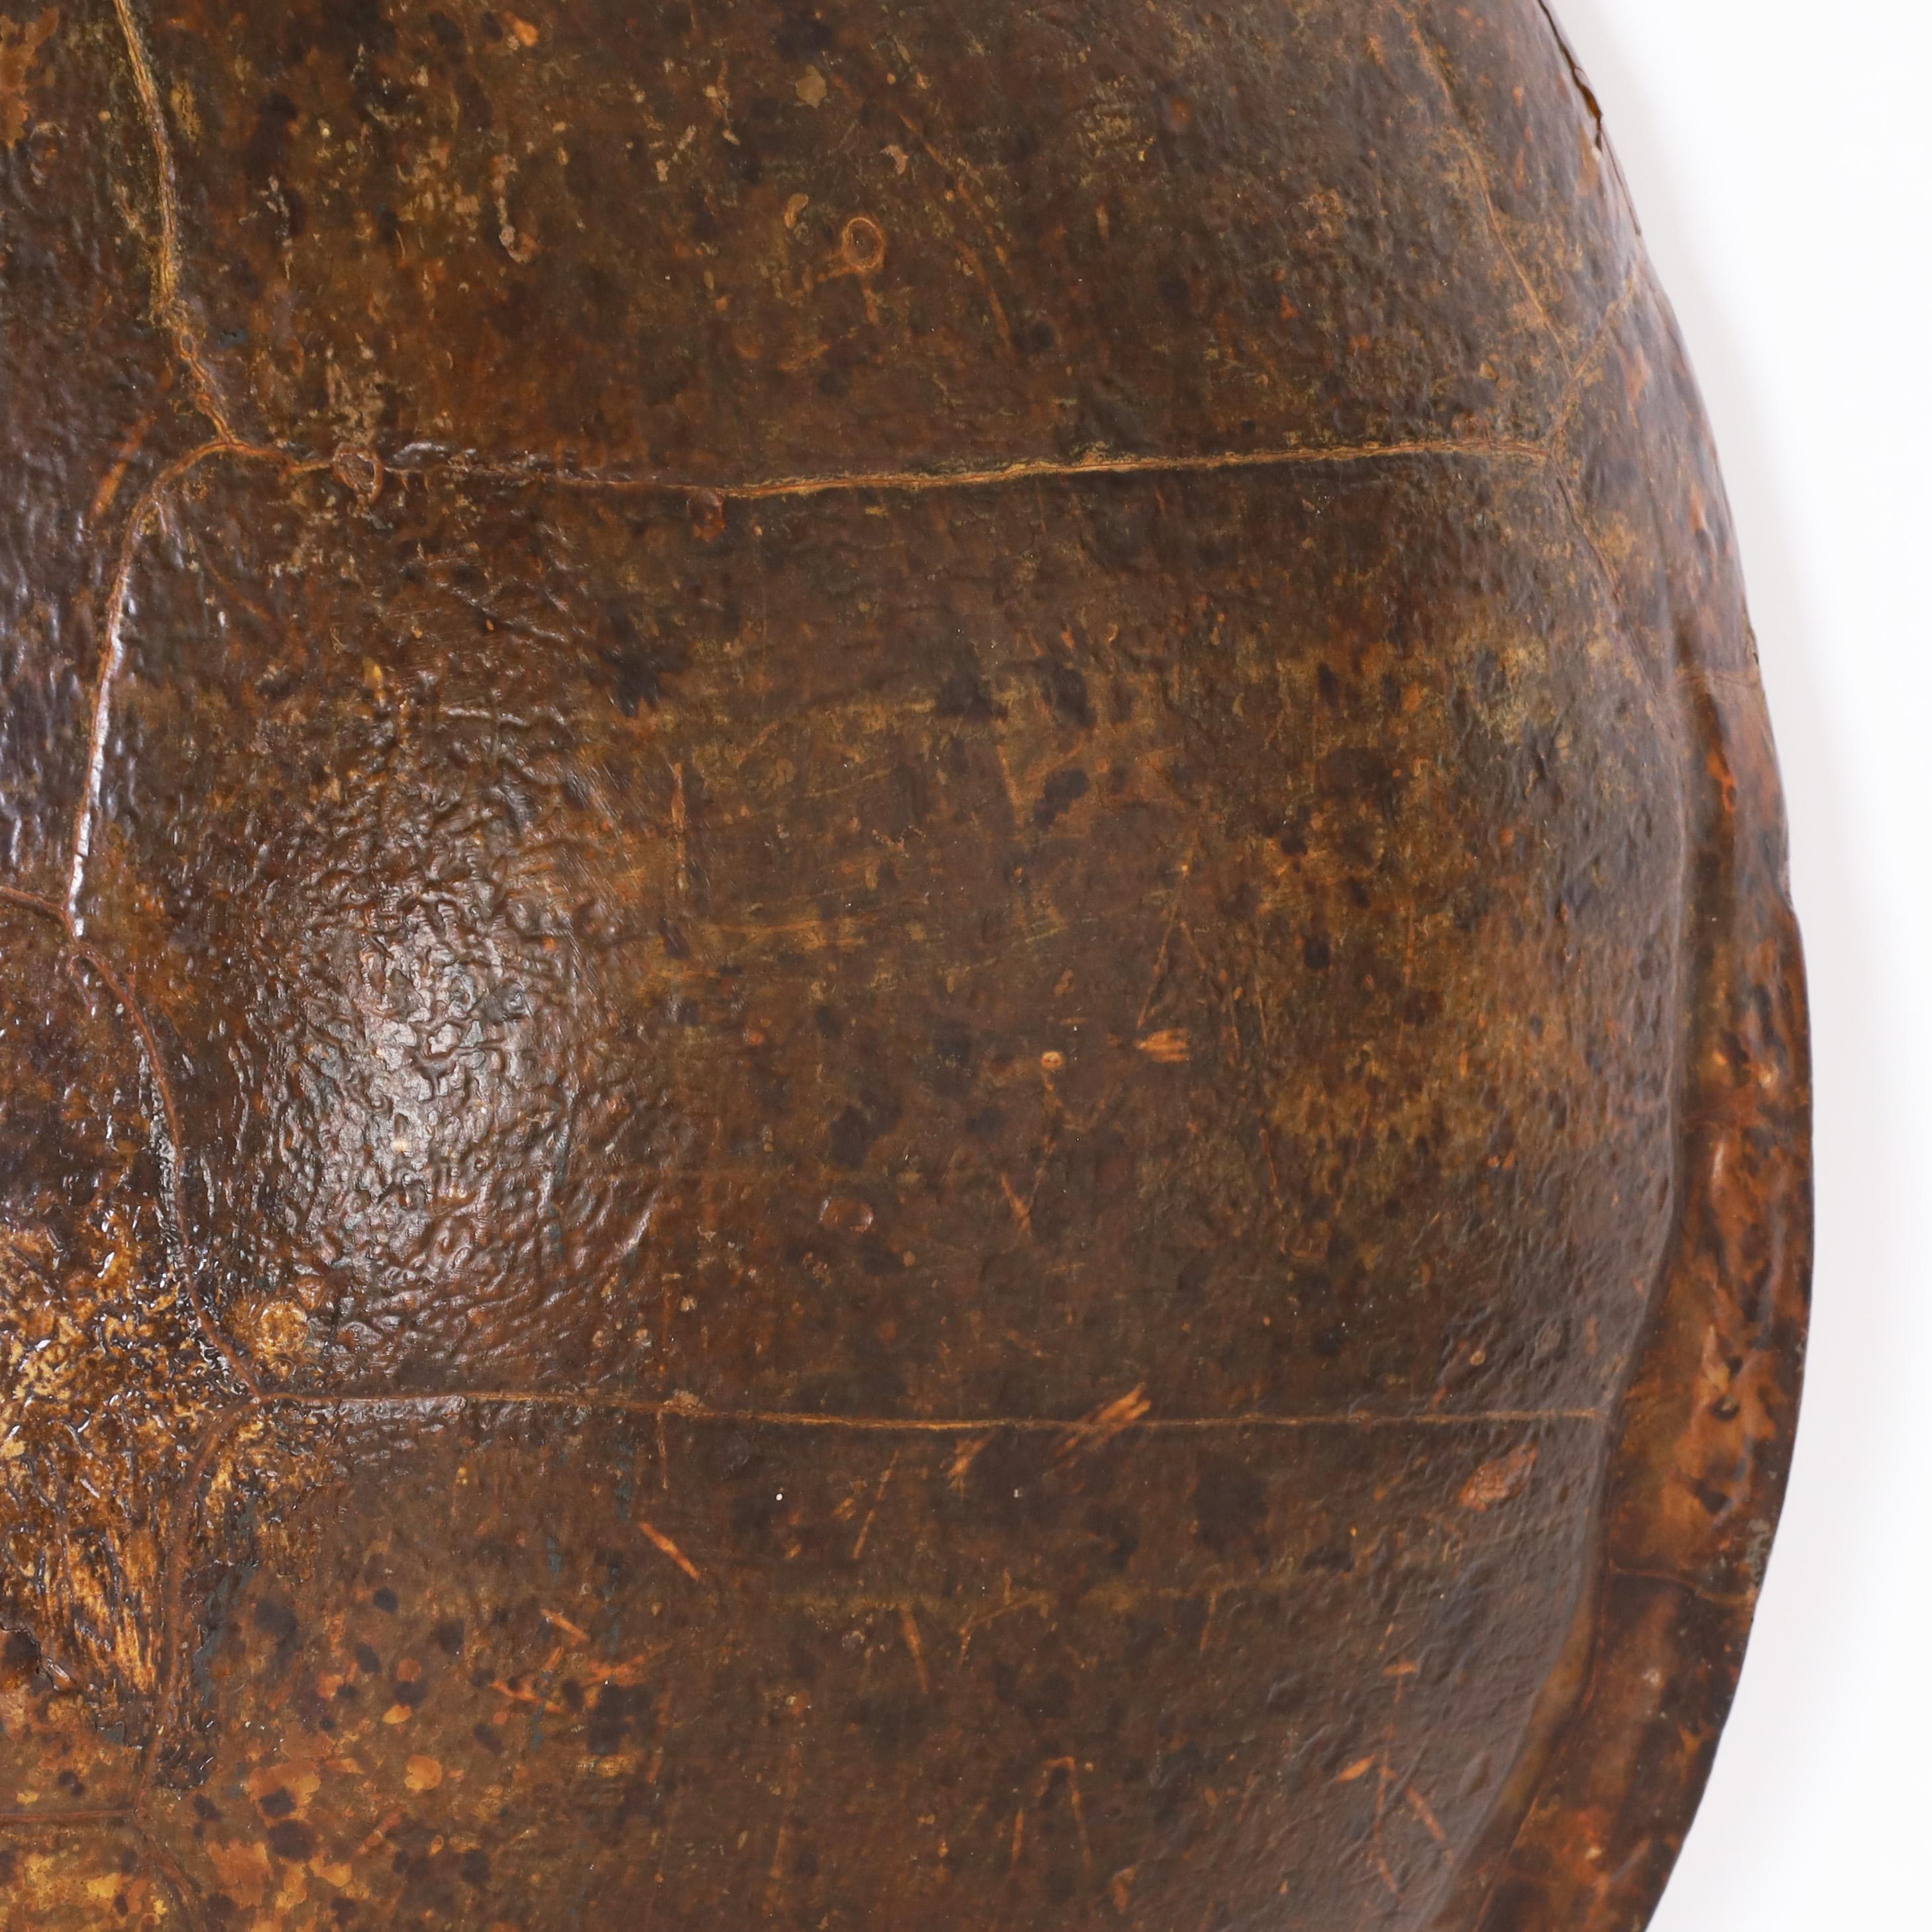 American Giant Turtle Shell or Carapace